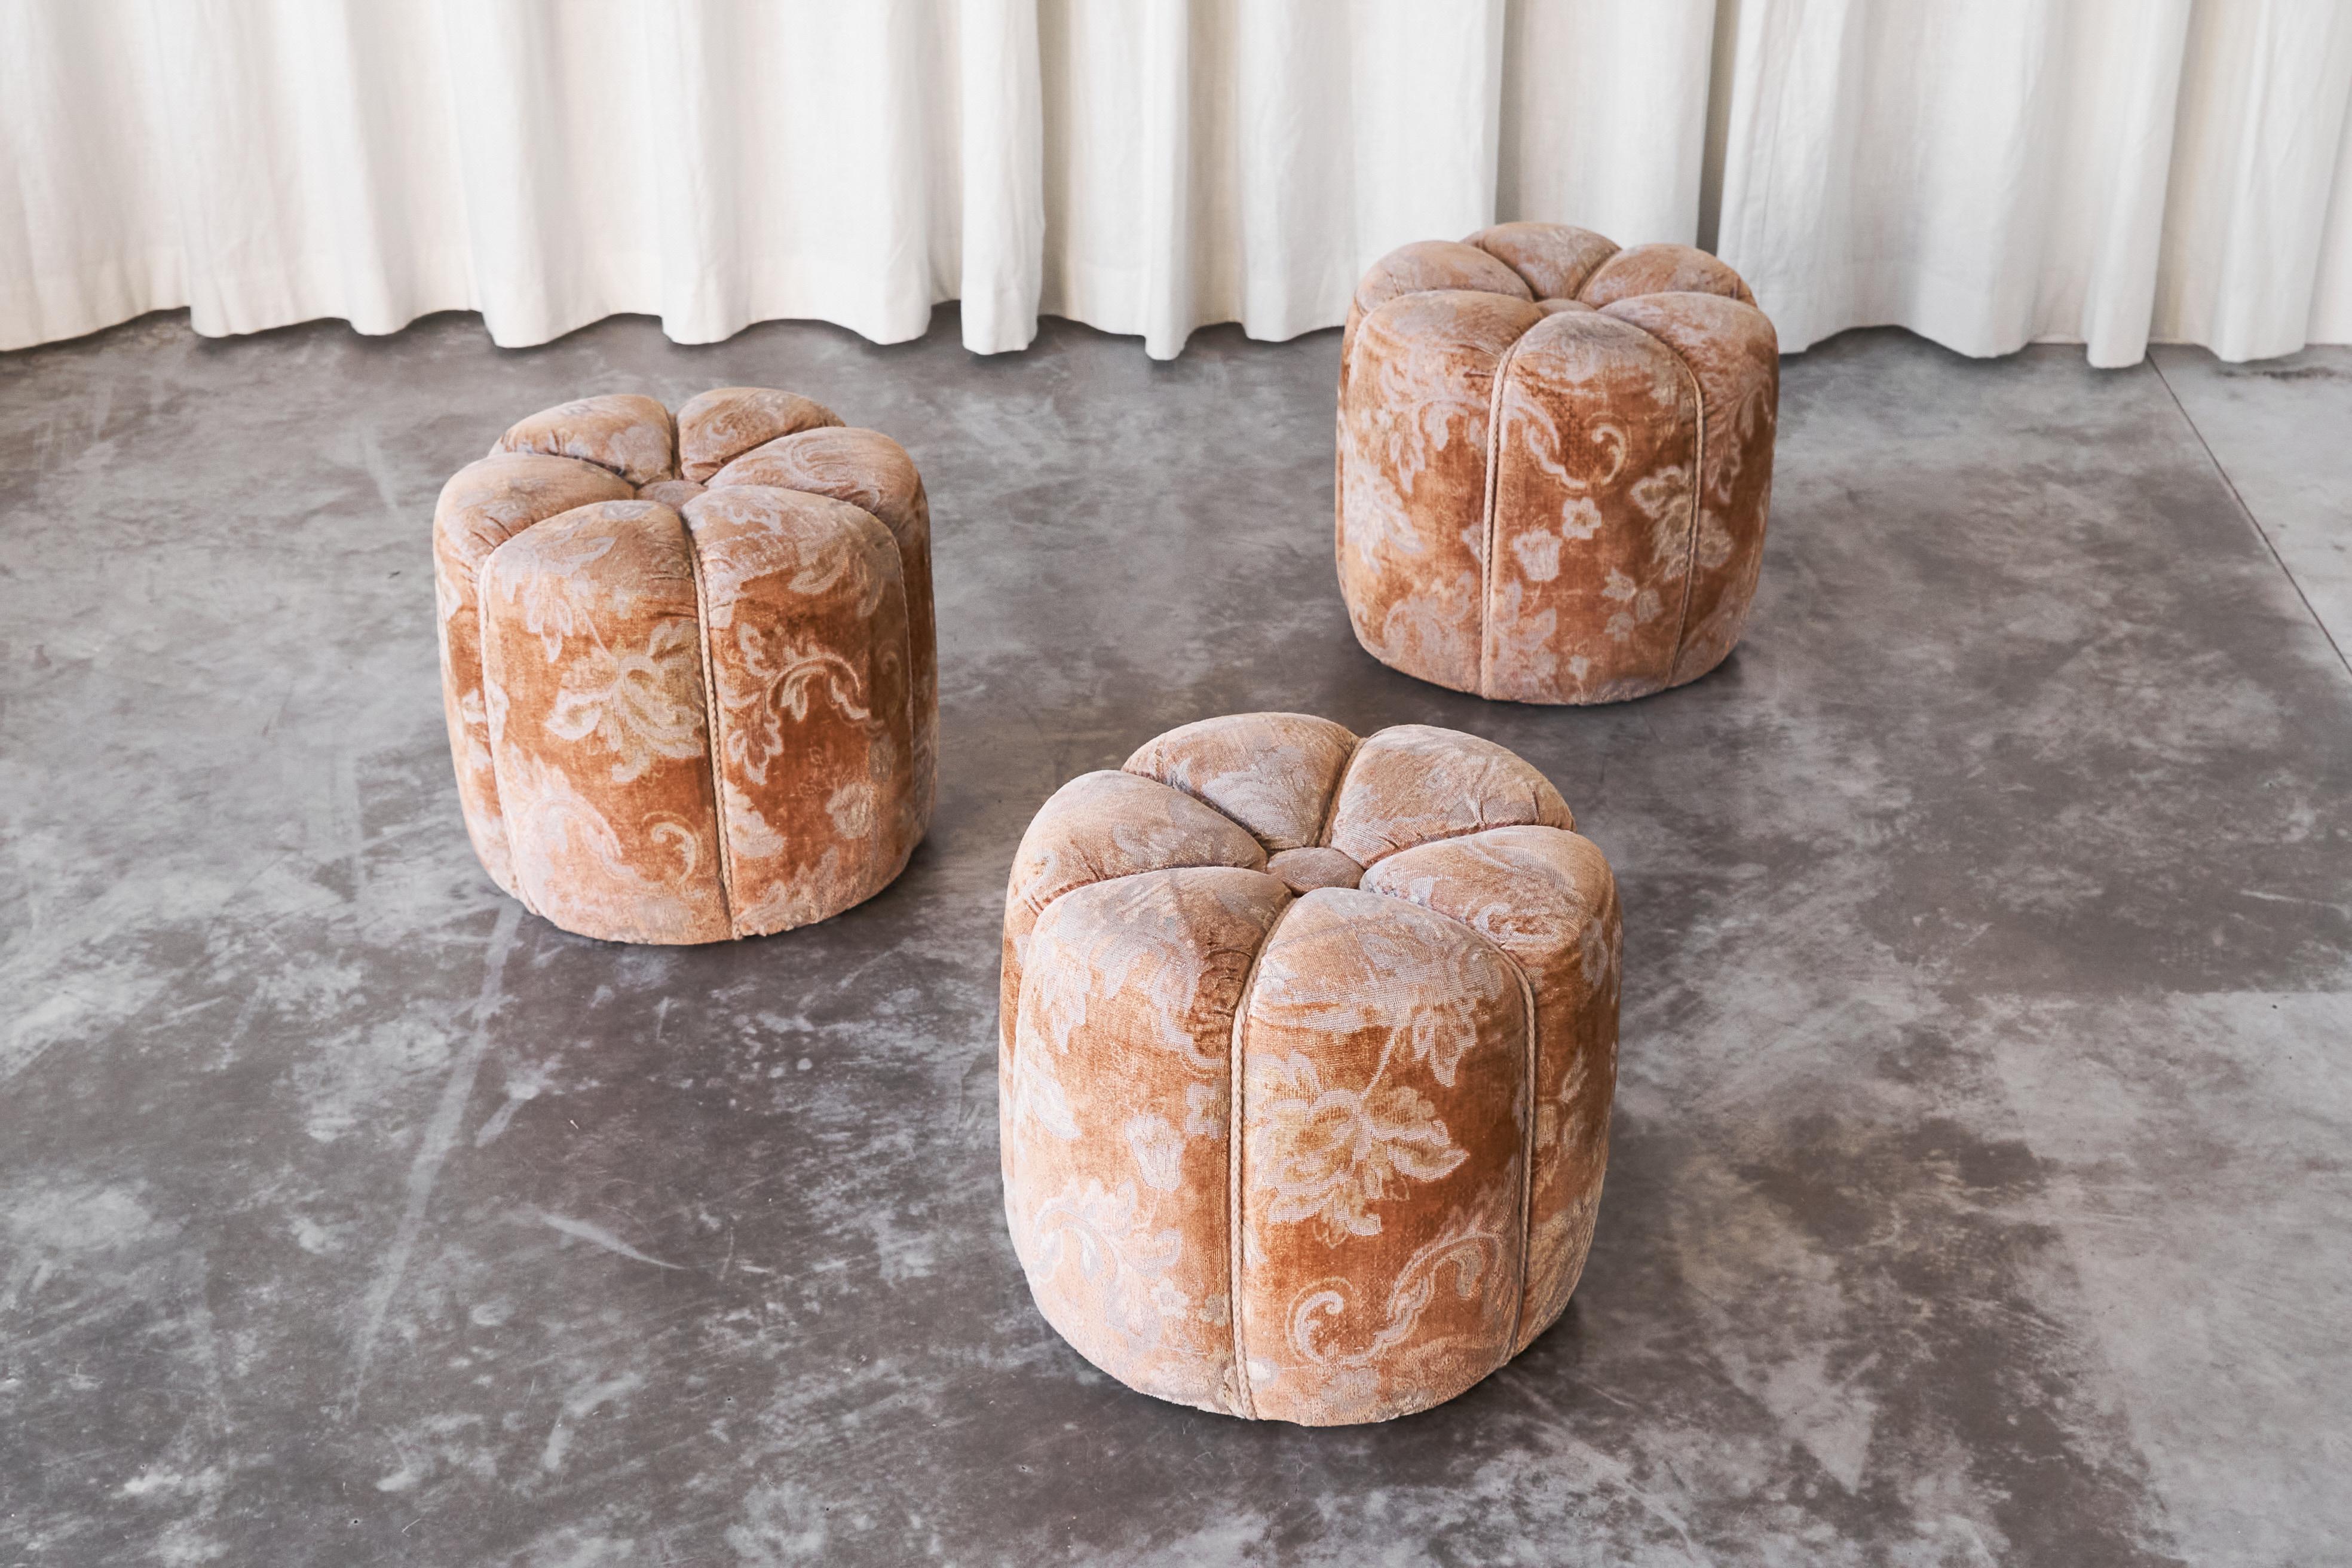 Jindřich Halabala Set of 3 Art Deco Poufs in Faded Floral Upholstery, Czech Republic, 1930s.

This is a very beautifully worn and faded set of 3 art deco poufs / tabourets by designer Jindřich Halabala, designed and made in the 1930s. 

Great as